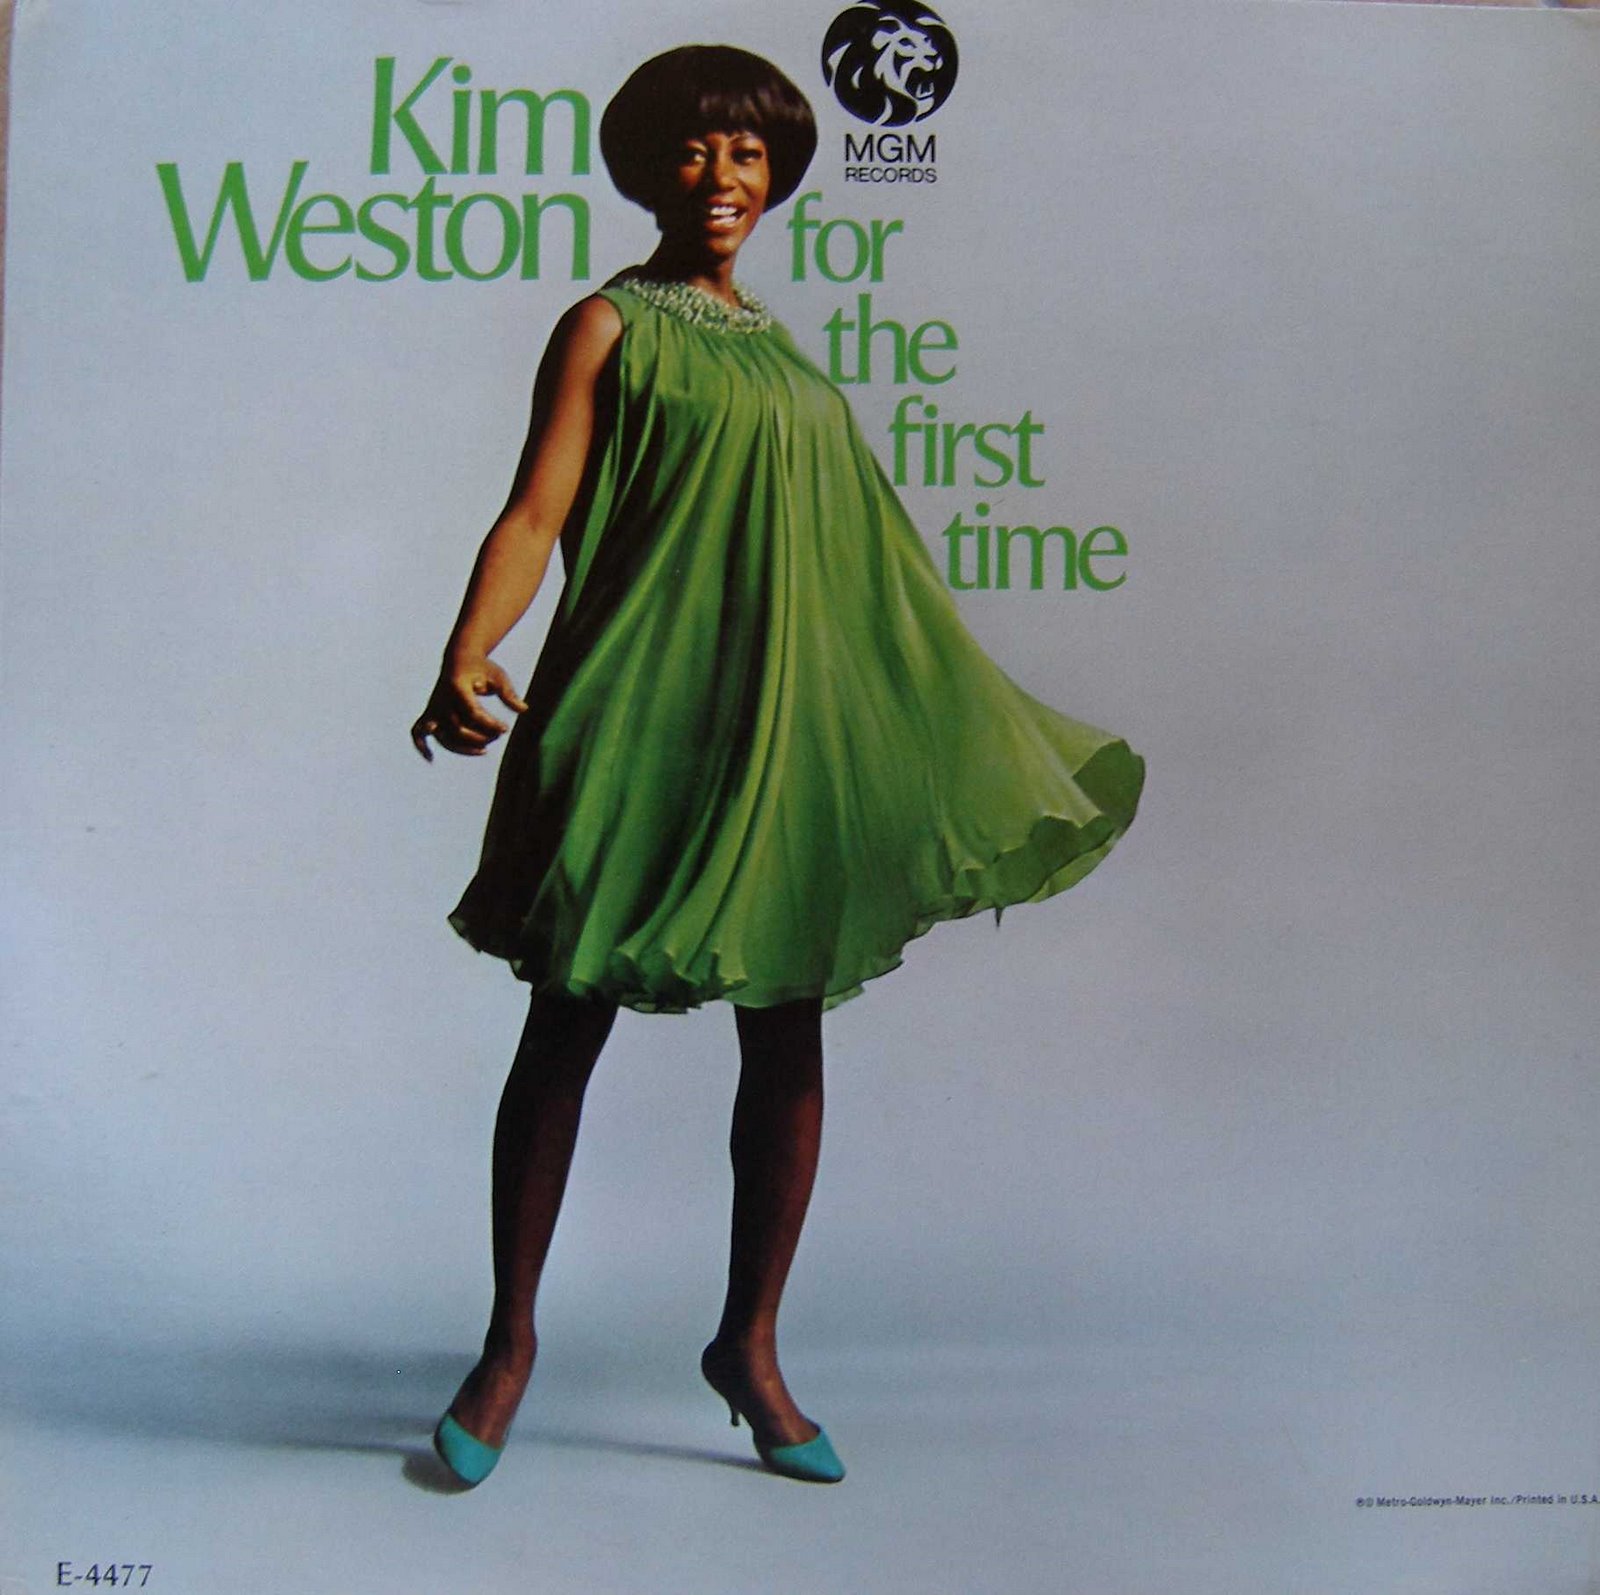 [kim+weston+-+1967+-+For+the+first+time+-+front+lp.JPG]